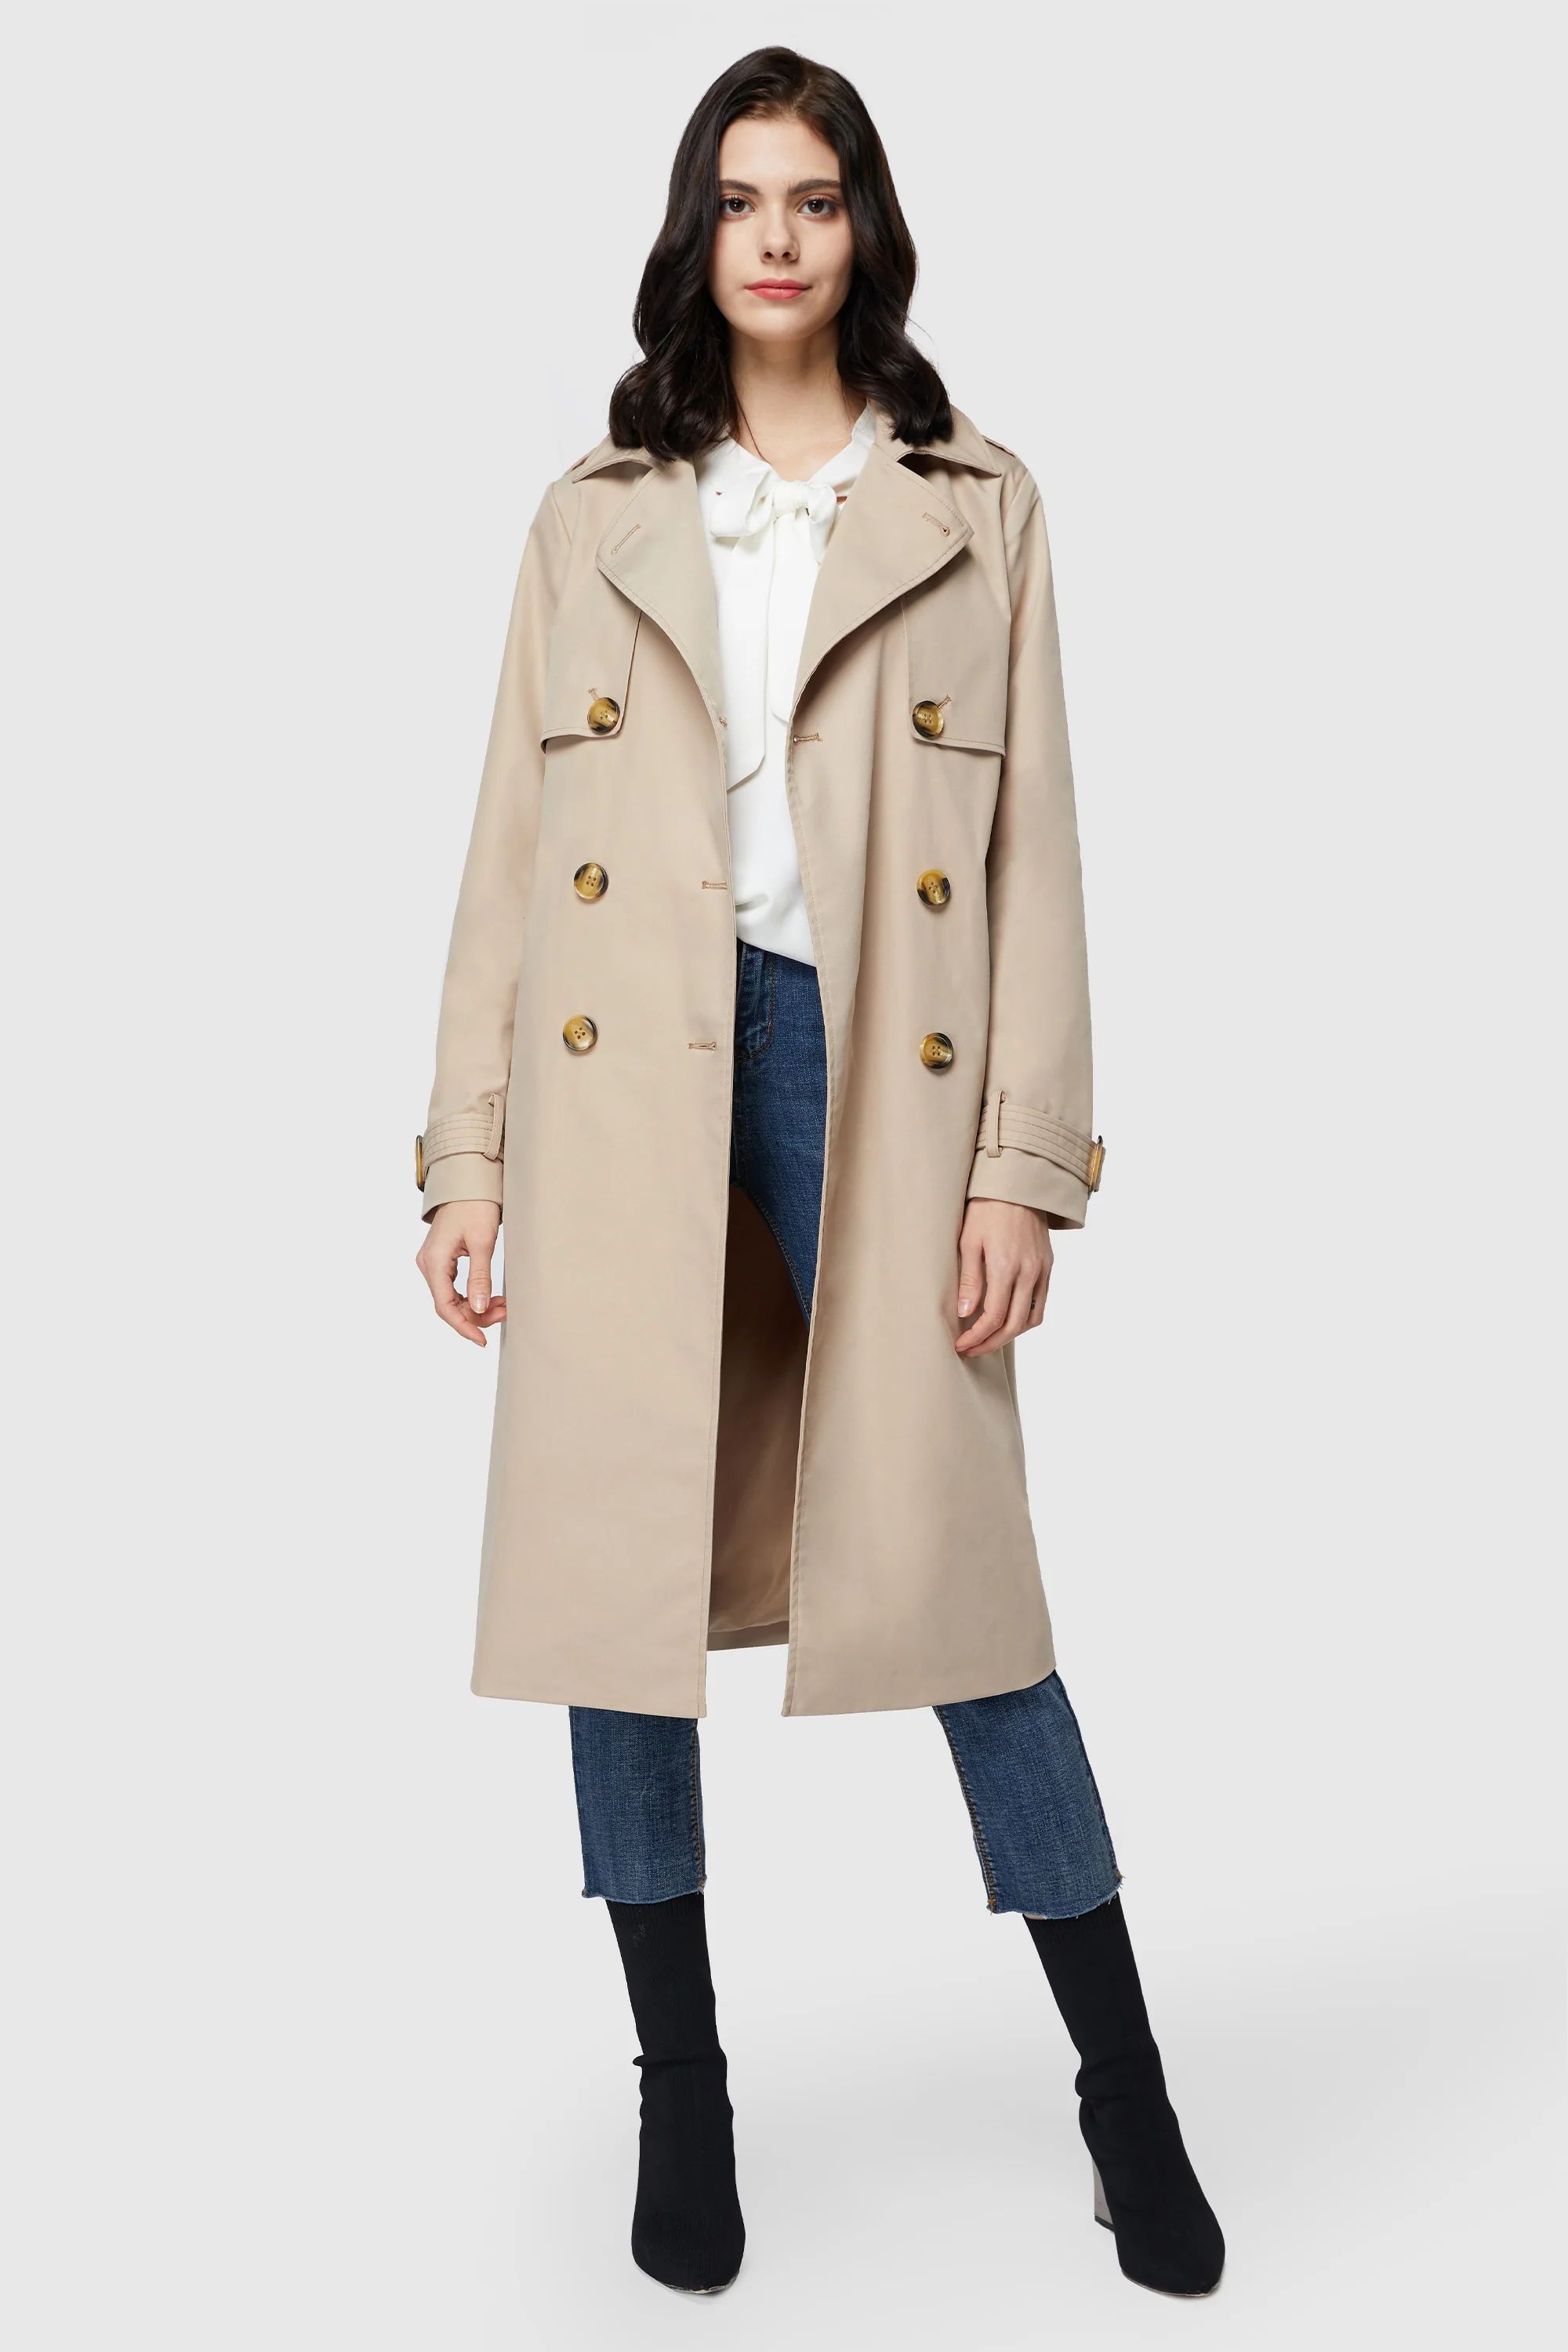 Orolay Women's 3/4 Length Belted Double-Breasted Trench Coat | Orolay